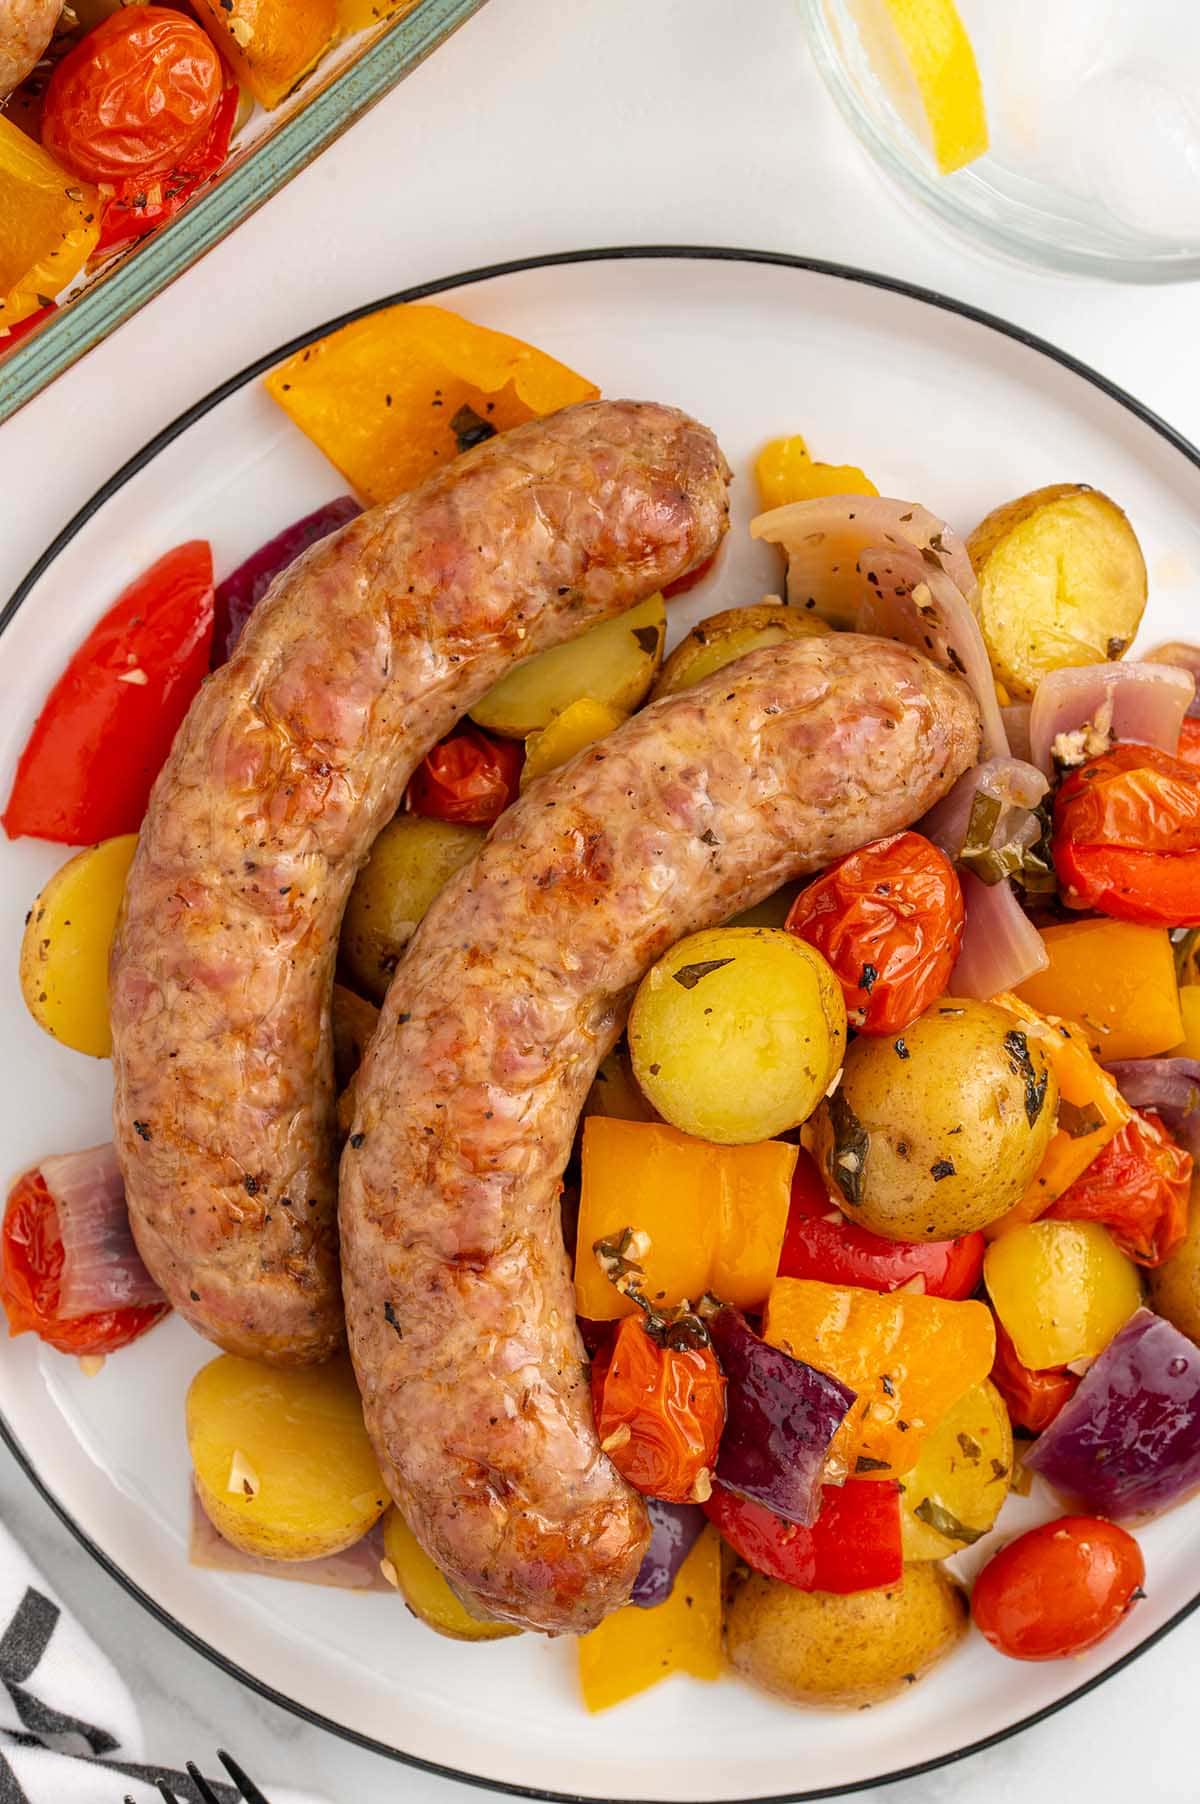 Baked Italian Sausage and vegetables on a white plate.